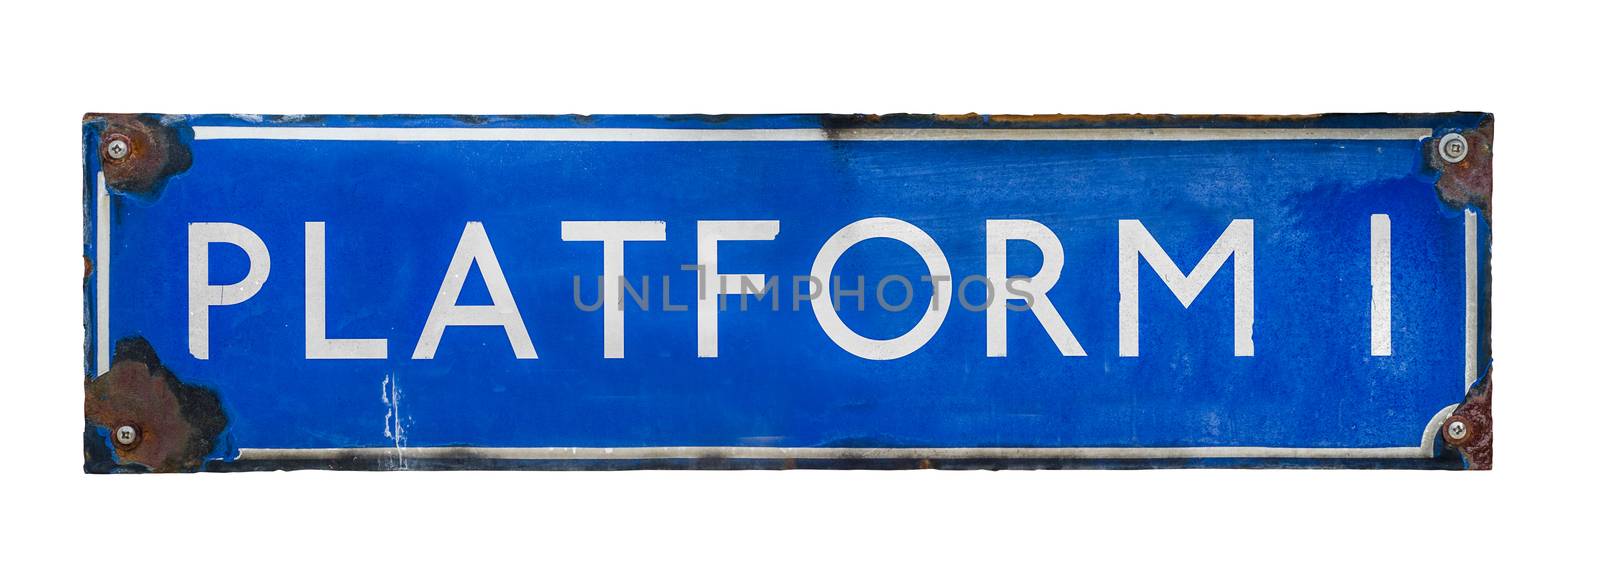 An Isolated Blue Vintage Railway Station Sign